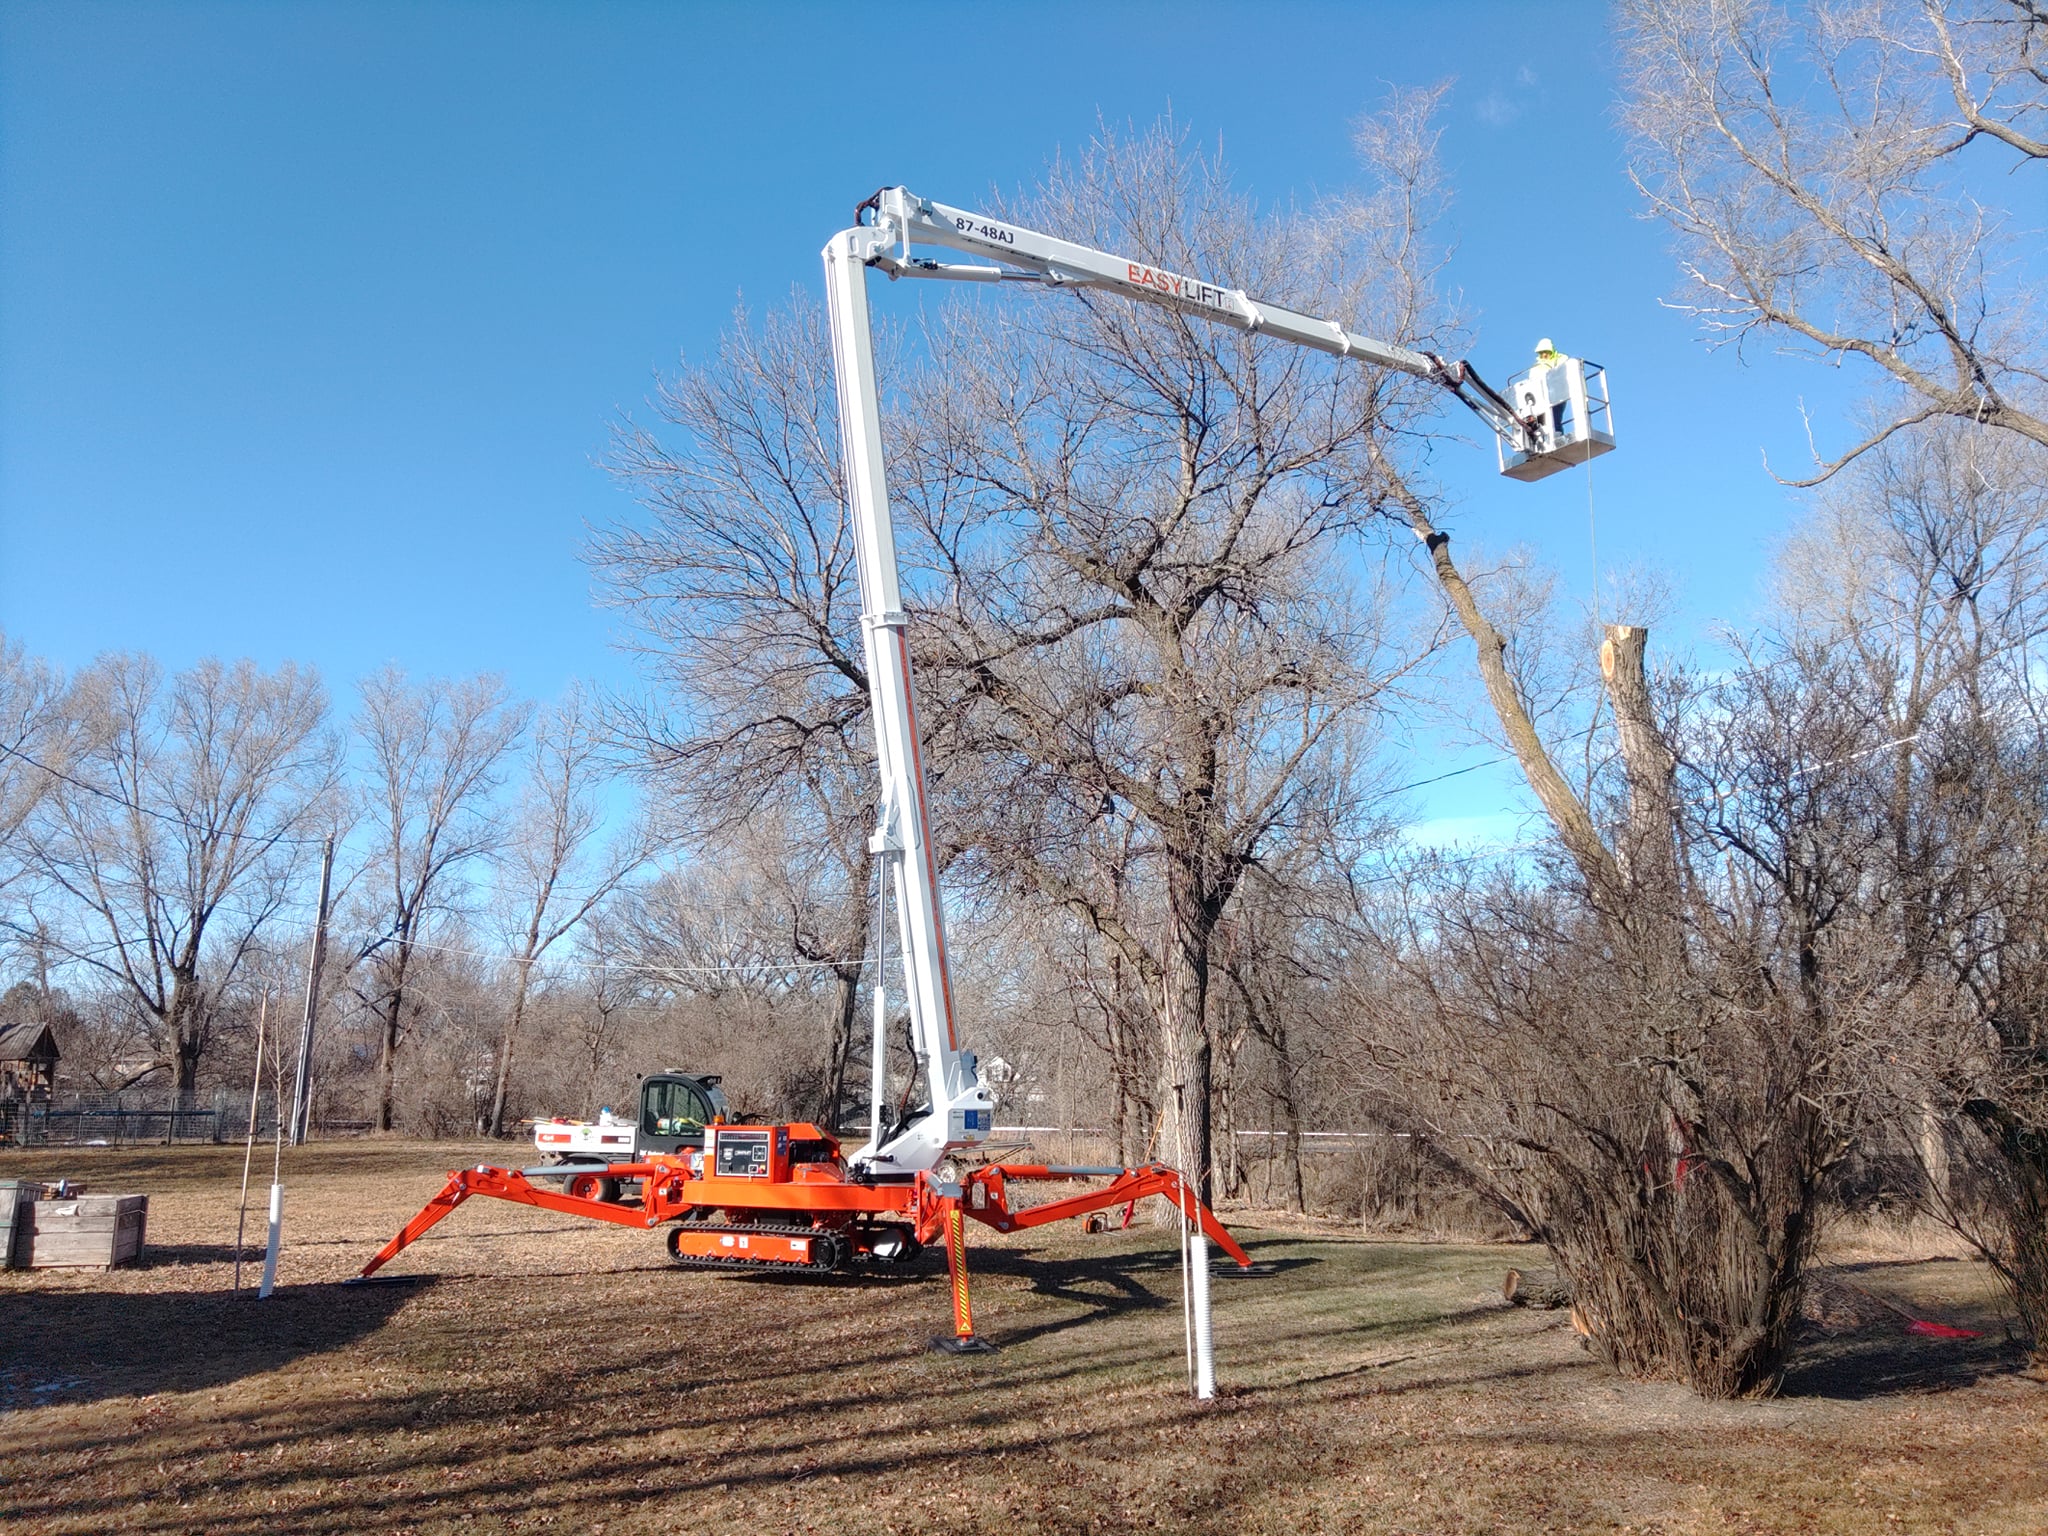 Tracked aerial platforms: complete guide to choosing